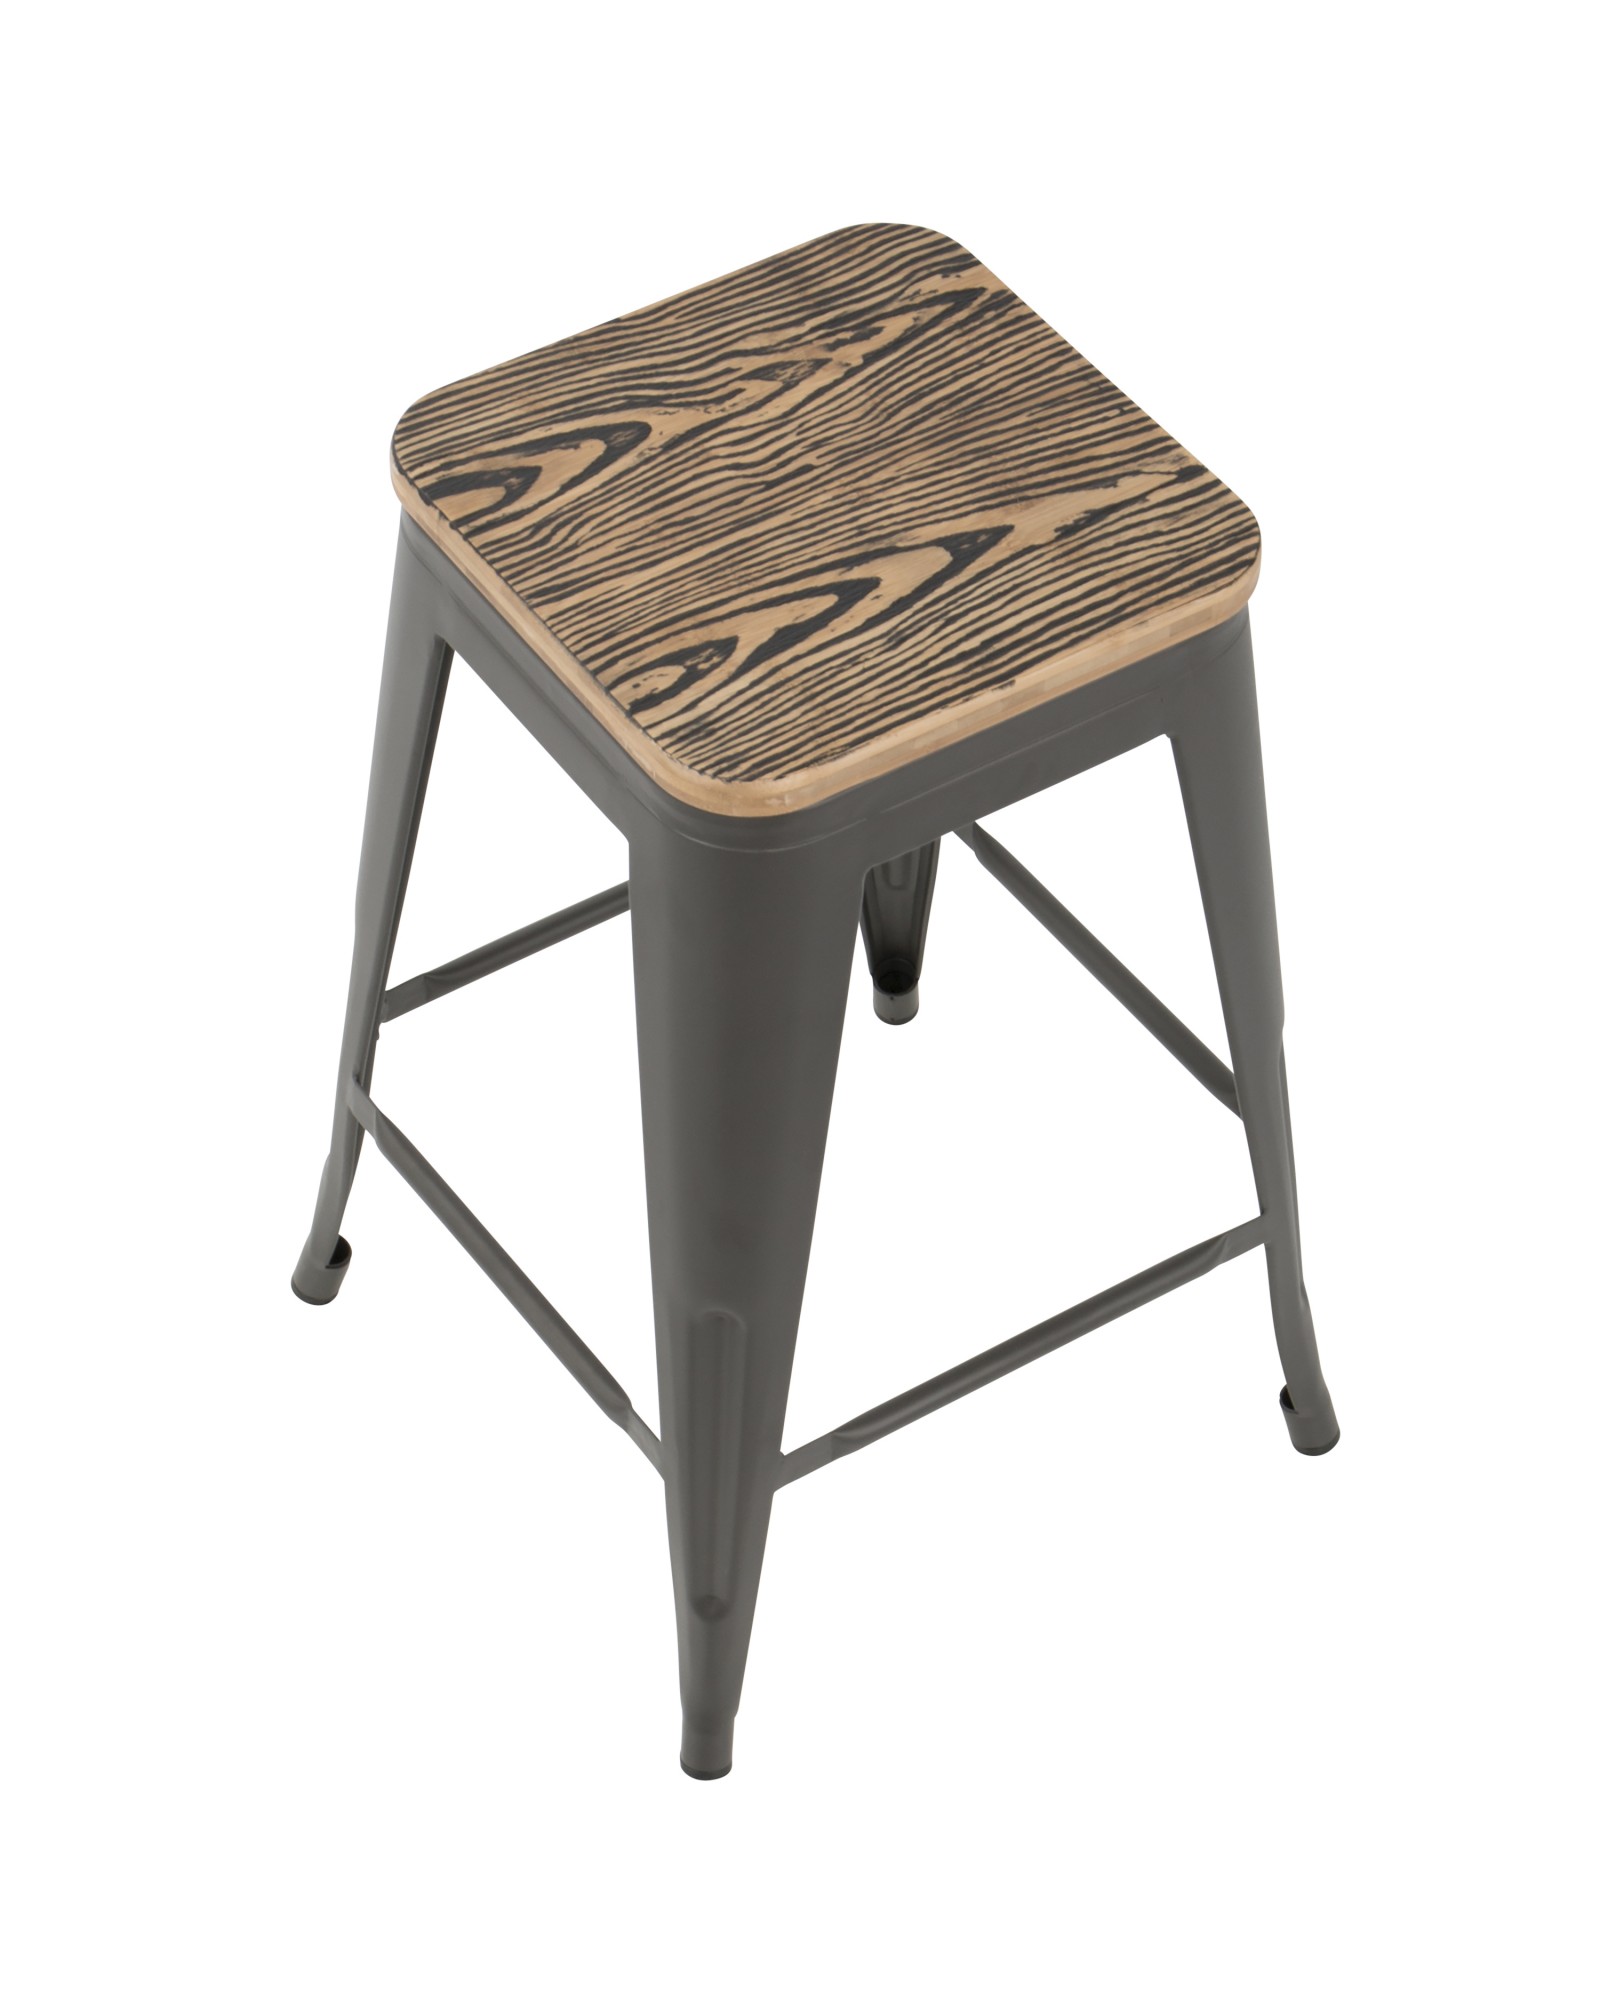 Oregon Industrial Stackable Counter Stool in Grey and Brown - Set of 2